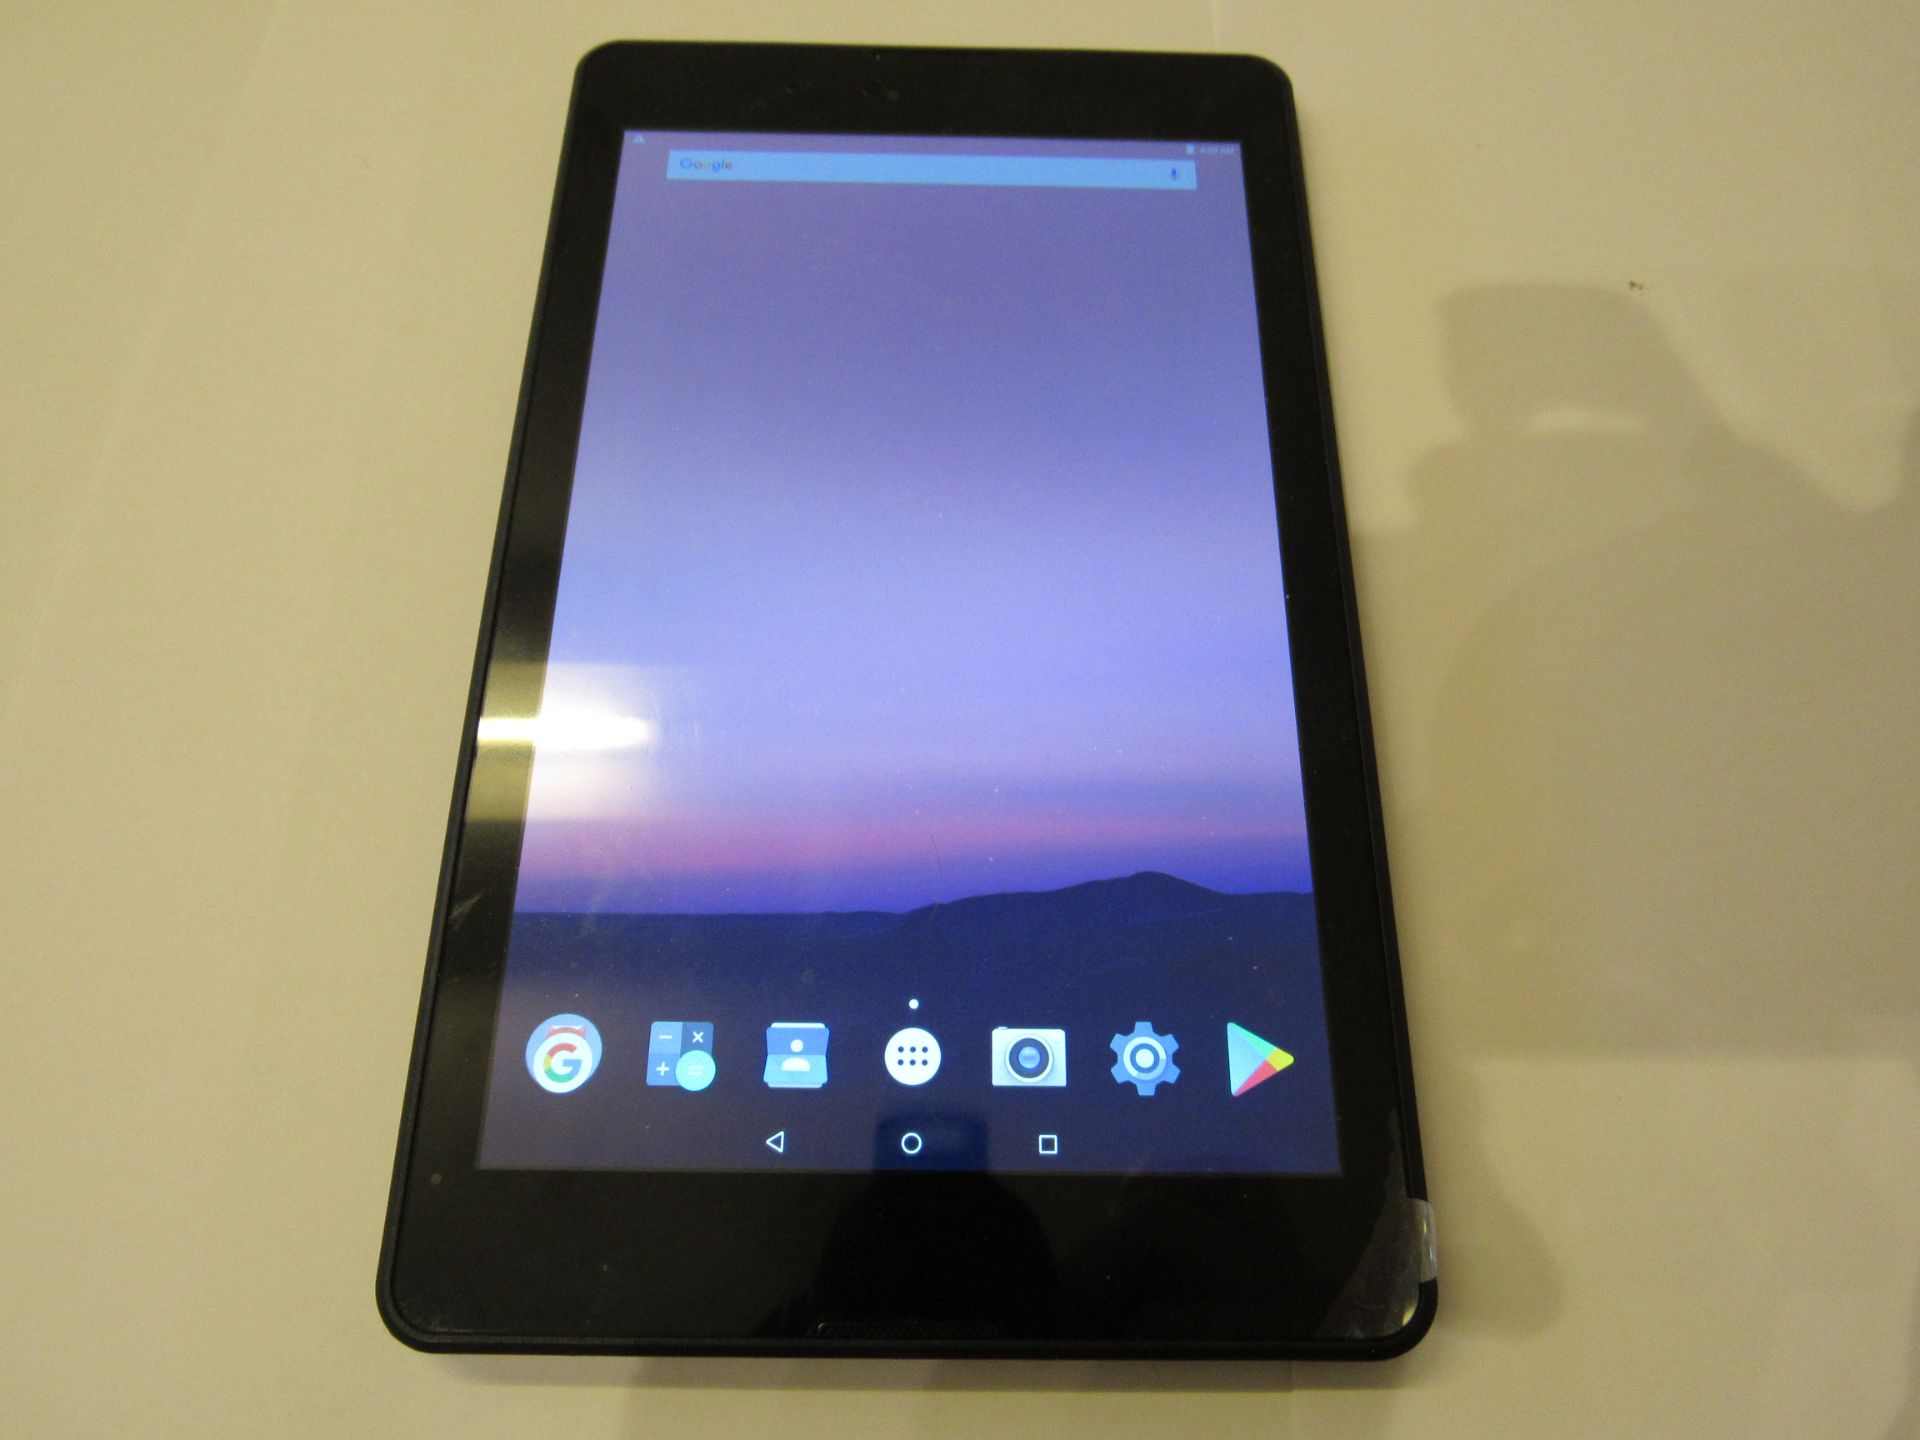 HLLO, SMB-H8009 Android 7.0 Tablet, 12GB Storage, Mico USB Port, No charger (Located Eddisons, Leeds - Image 12 of 13